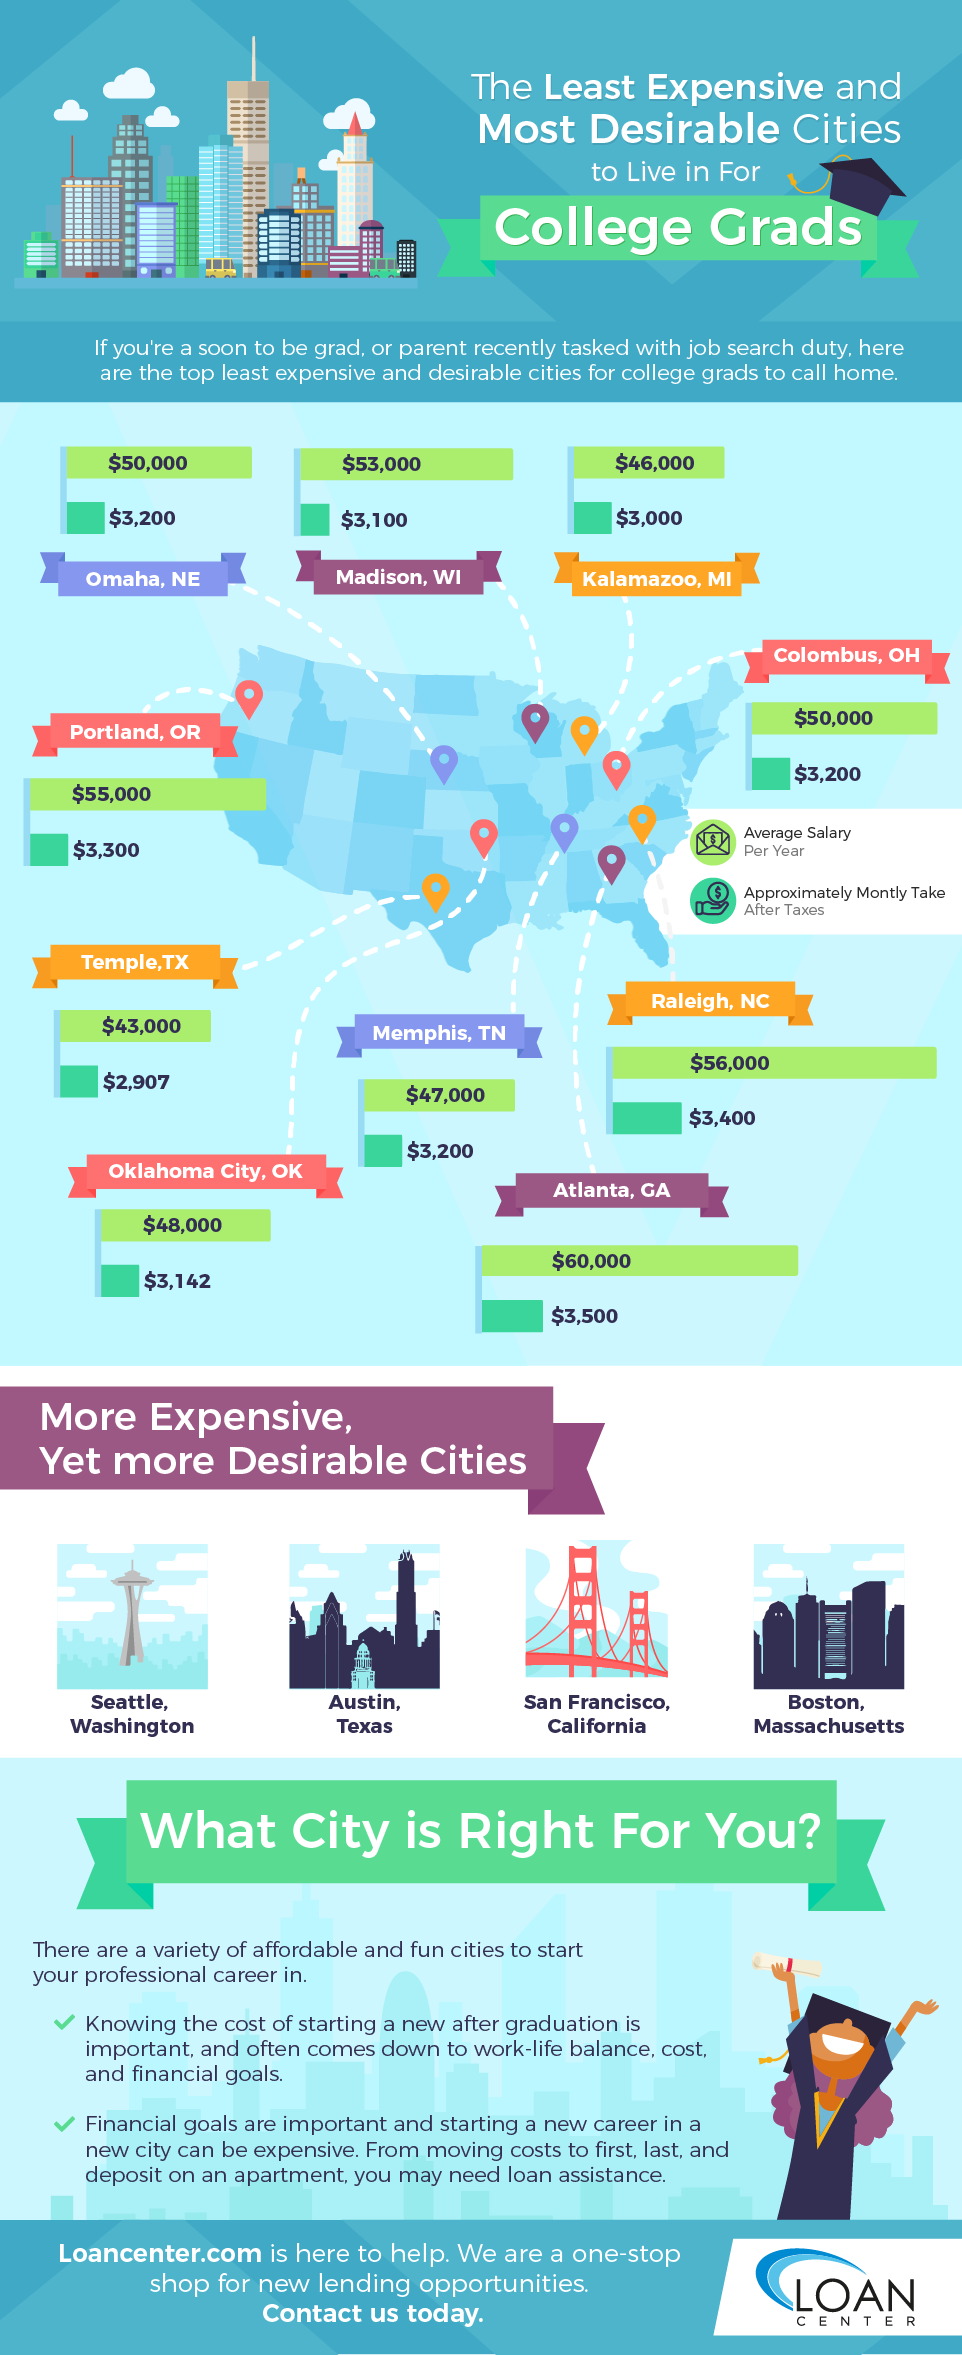 The Least Expensive and Most Desirable Cities to Live in For College